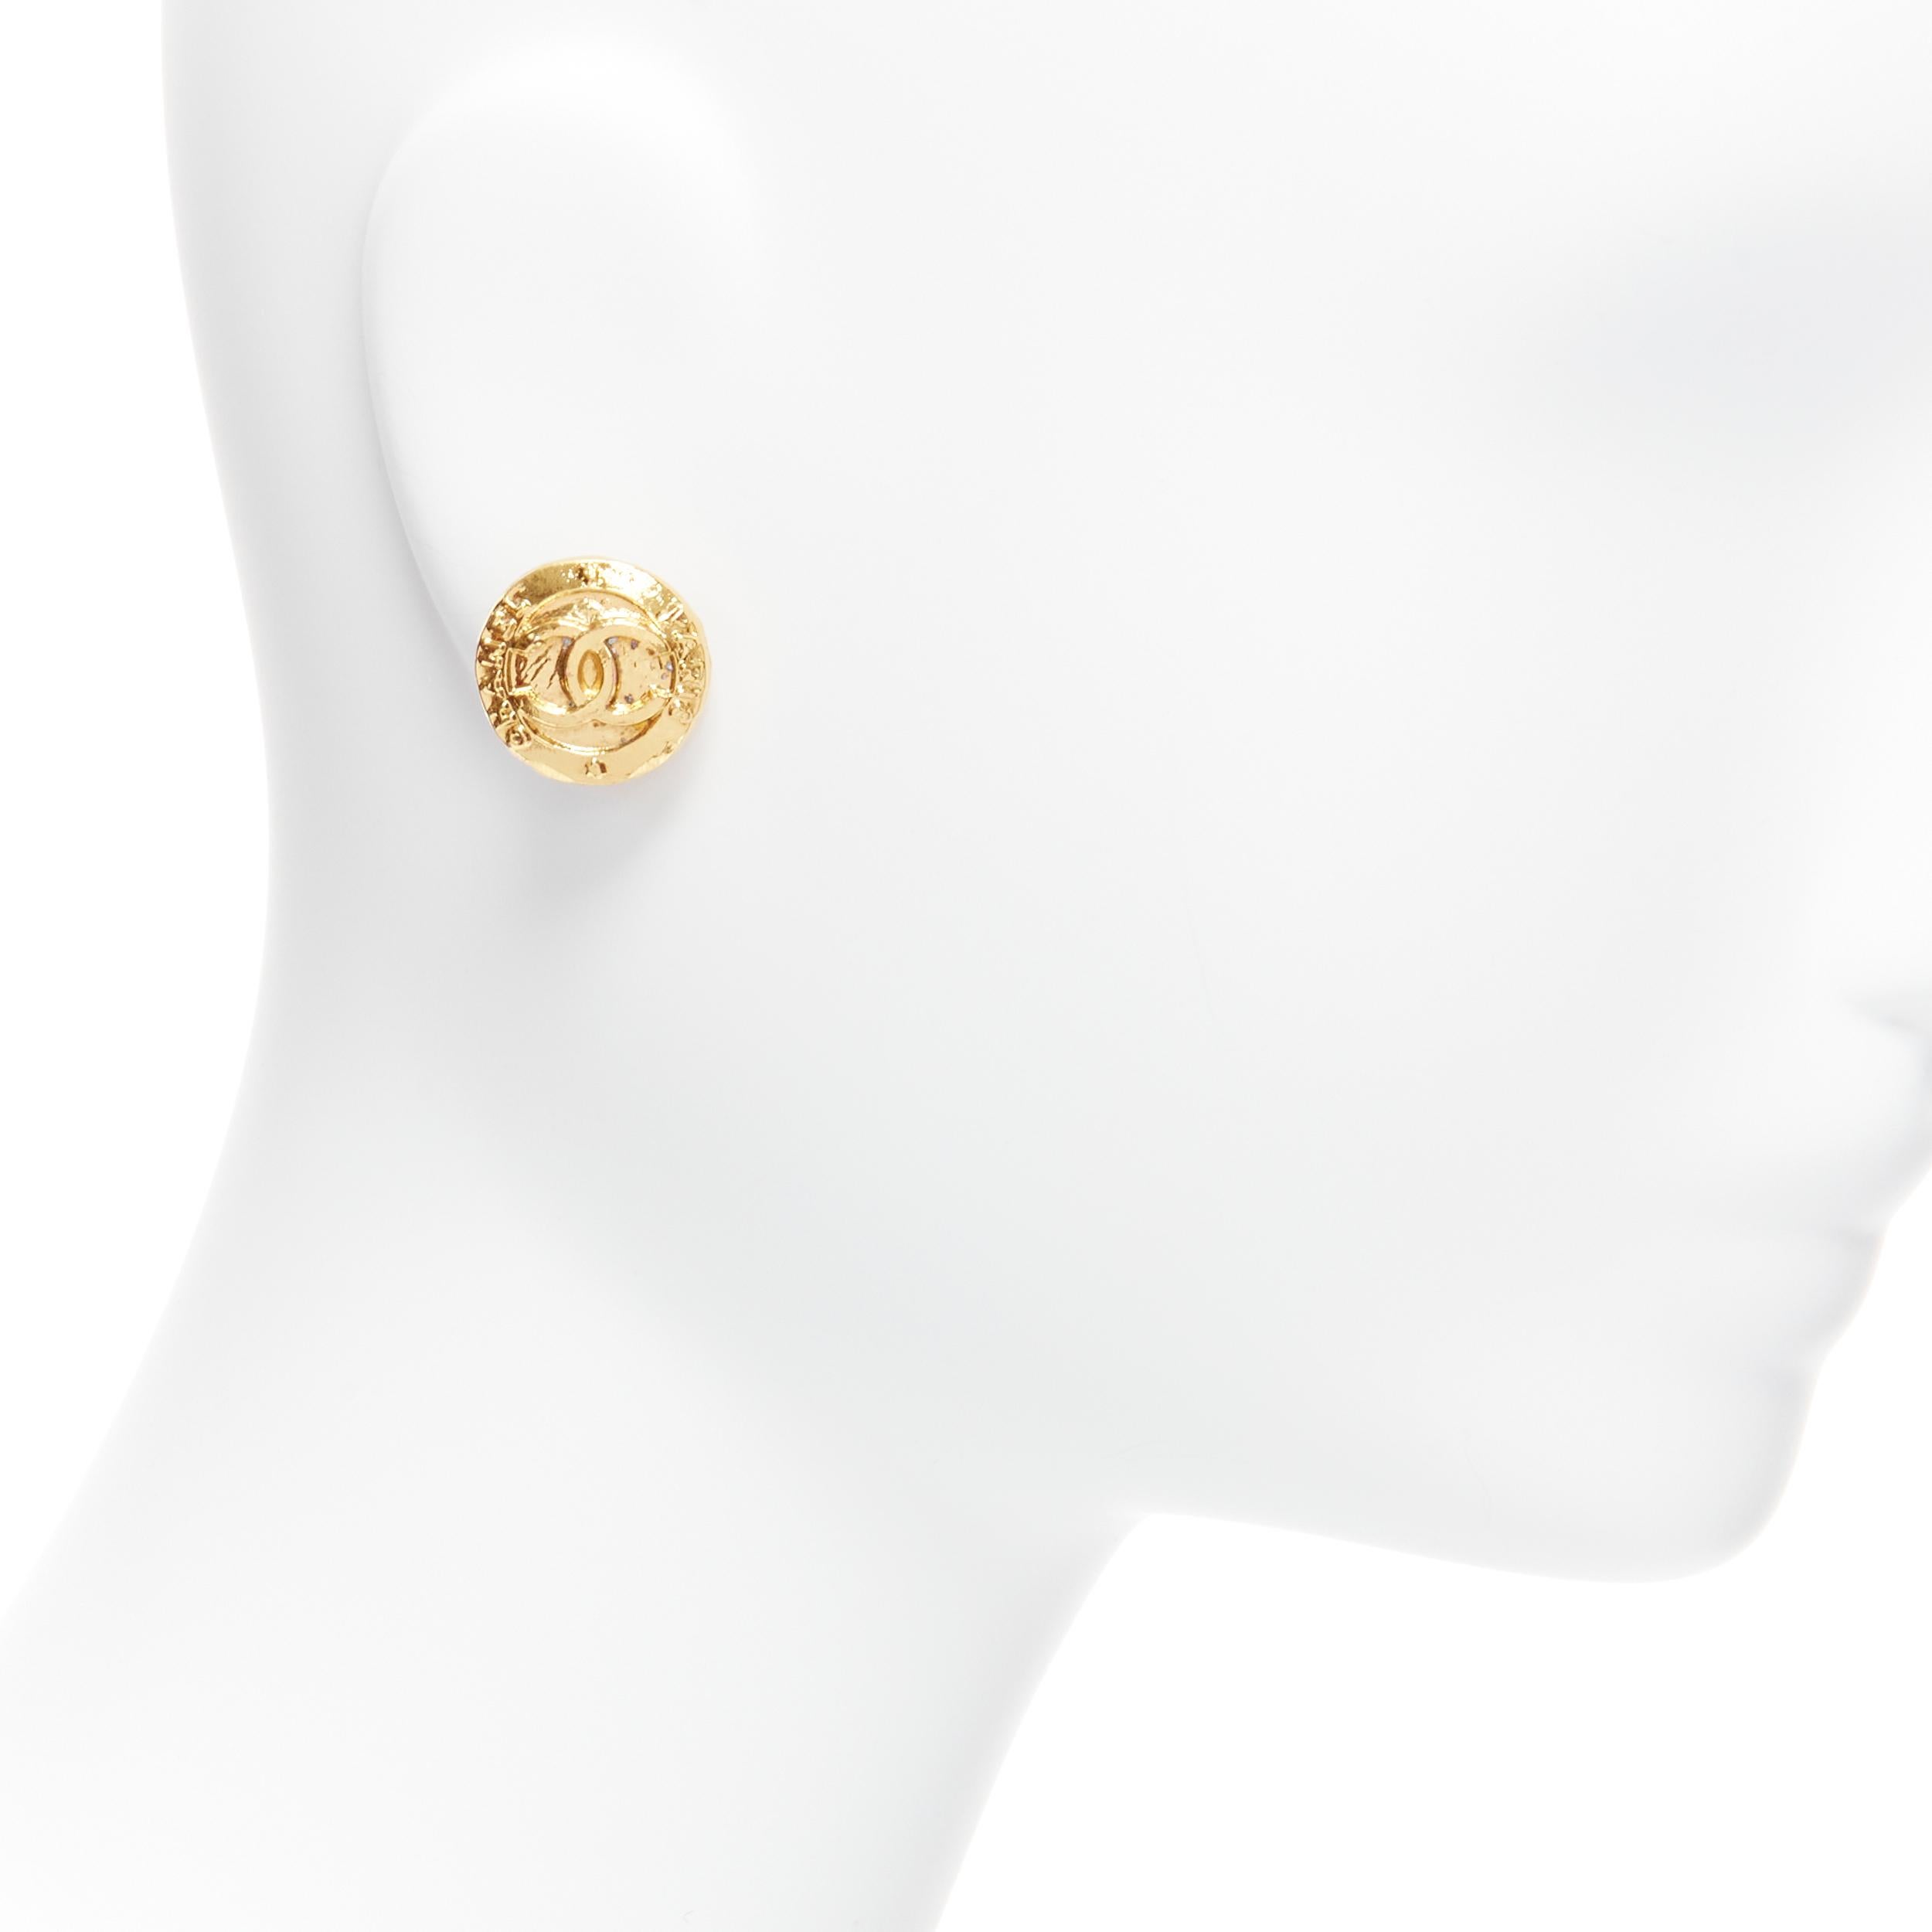 CHANEL Collection 28 Vintage gold tone CC logo coin medallion clip on earring
Reference: TGAS/D00161
Brand: Chanel
Designer: Karl Lagerfeld
Collection: Collection 28
Material: Metal
Color: Gold
Pattern: Solid
Closure: Clip On
Made in: